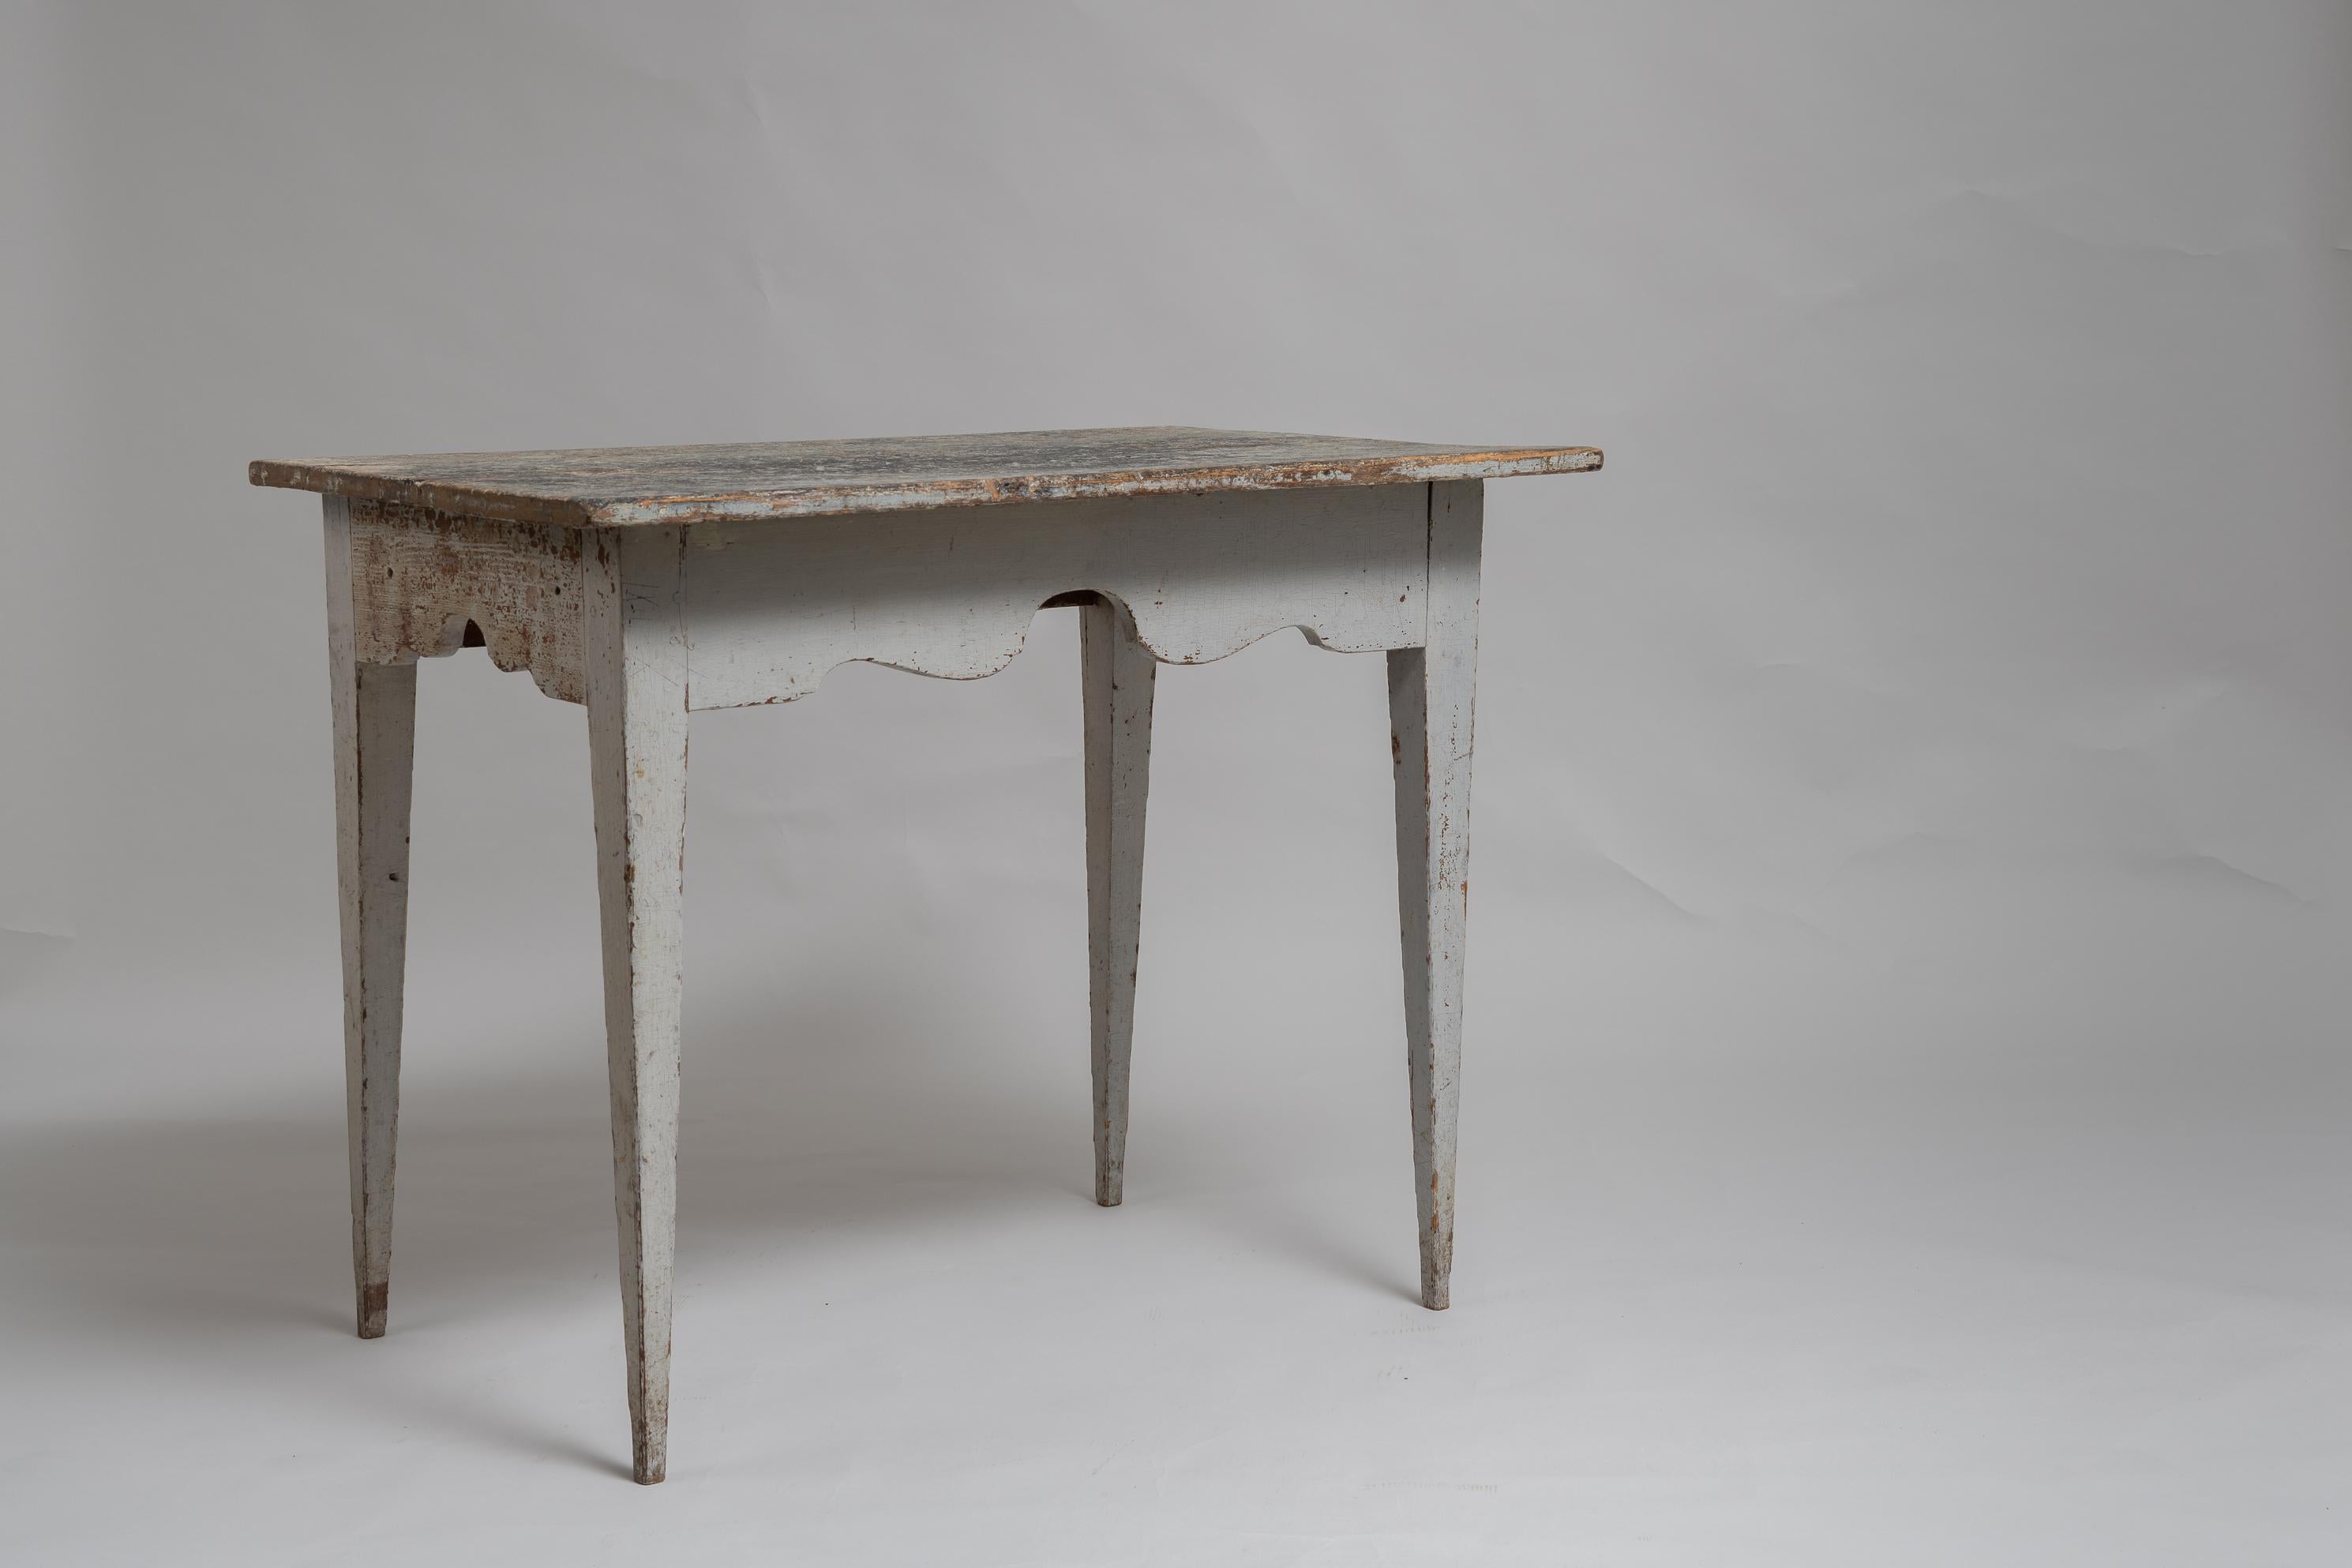 Swedish country wall table or console table in gustavian style from Northern Sweden. Made around 1810 to 1820 in painted pine. Unusual profiled edge on the front and short sides. The table also has traces of 19th century graffiti on the table top,